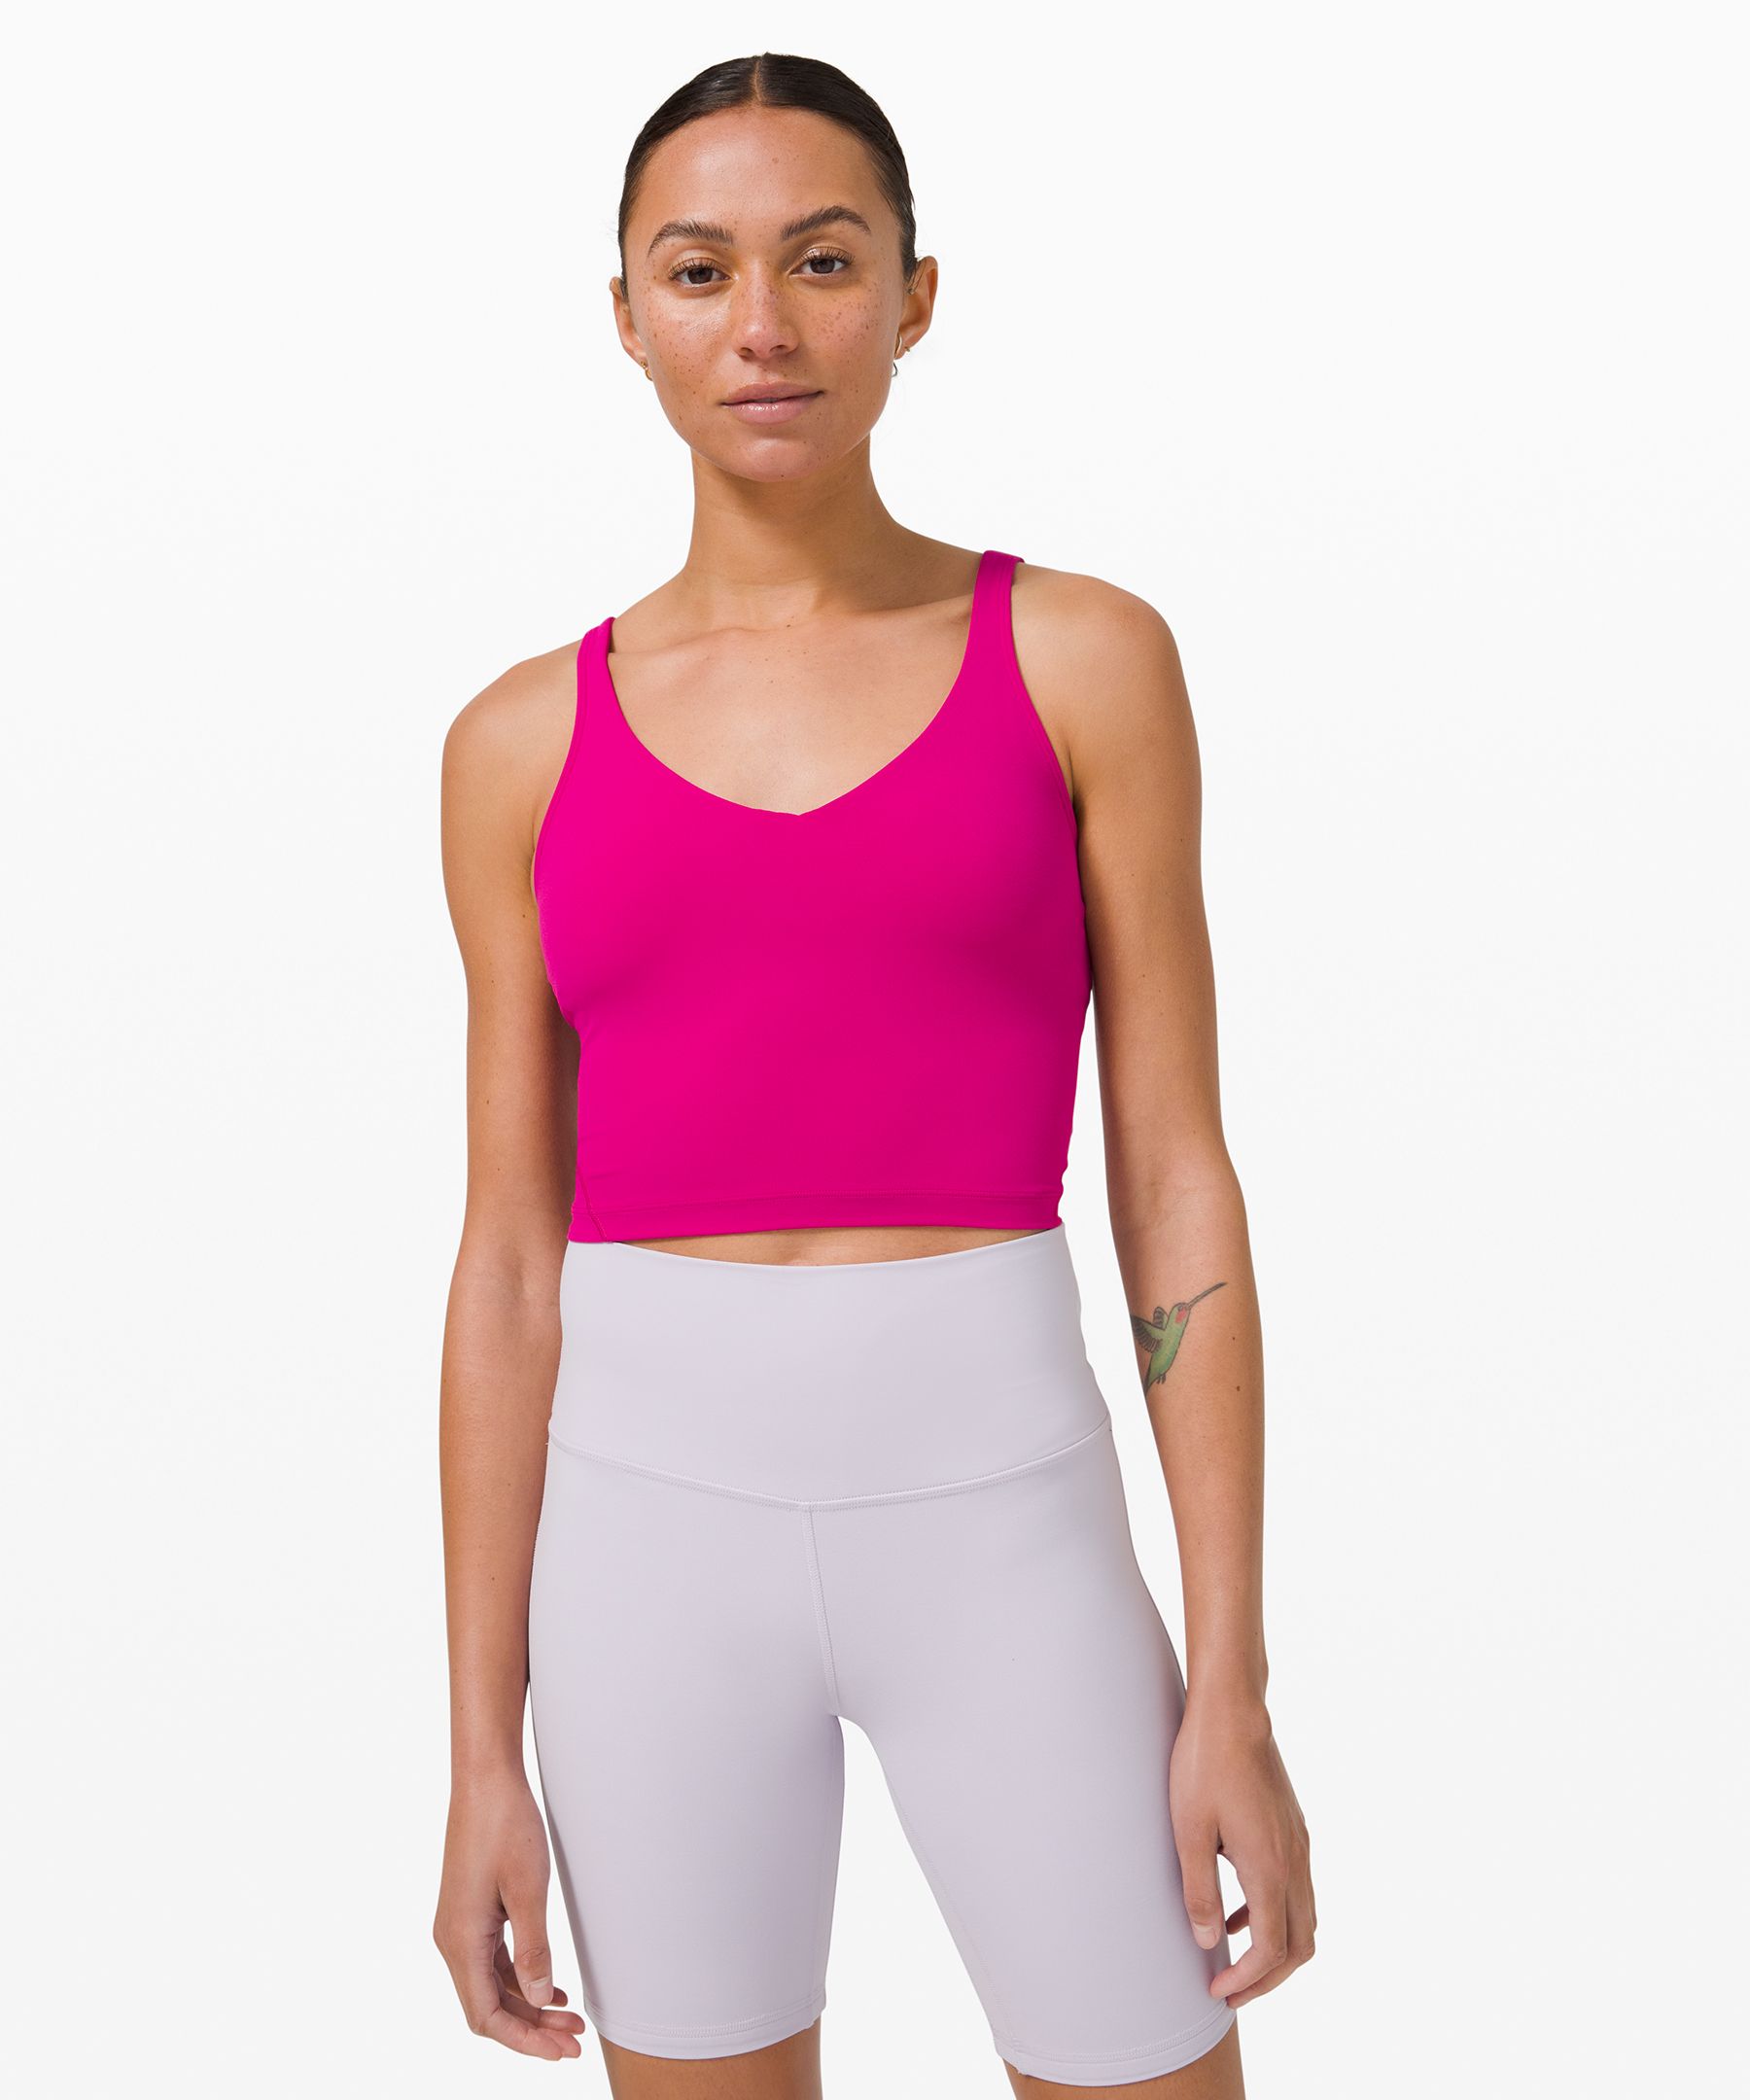 How To Wash Lululemon Align Tanks With